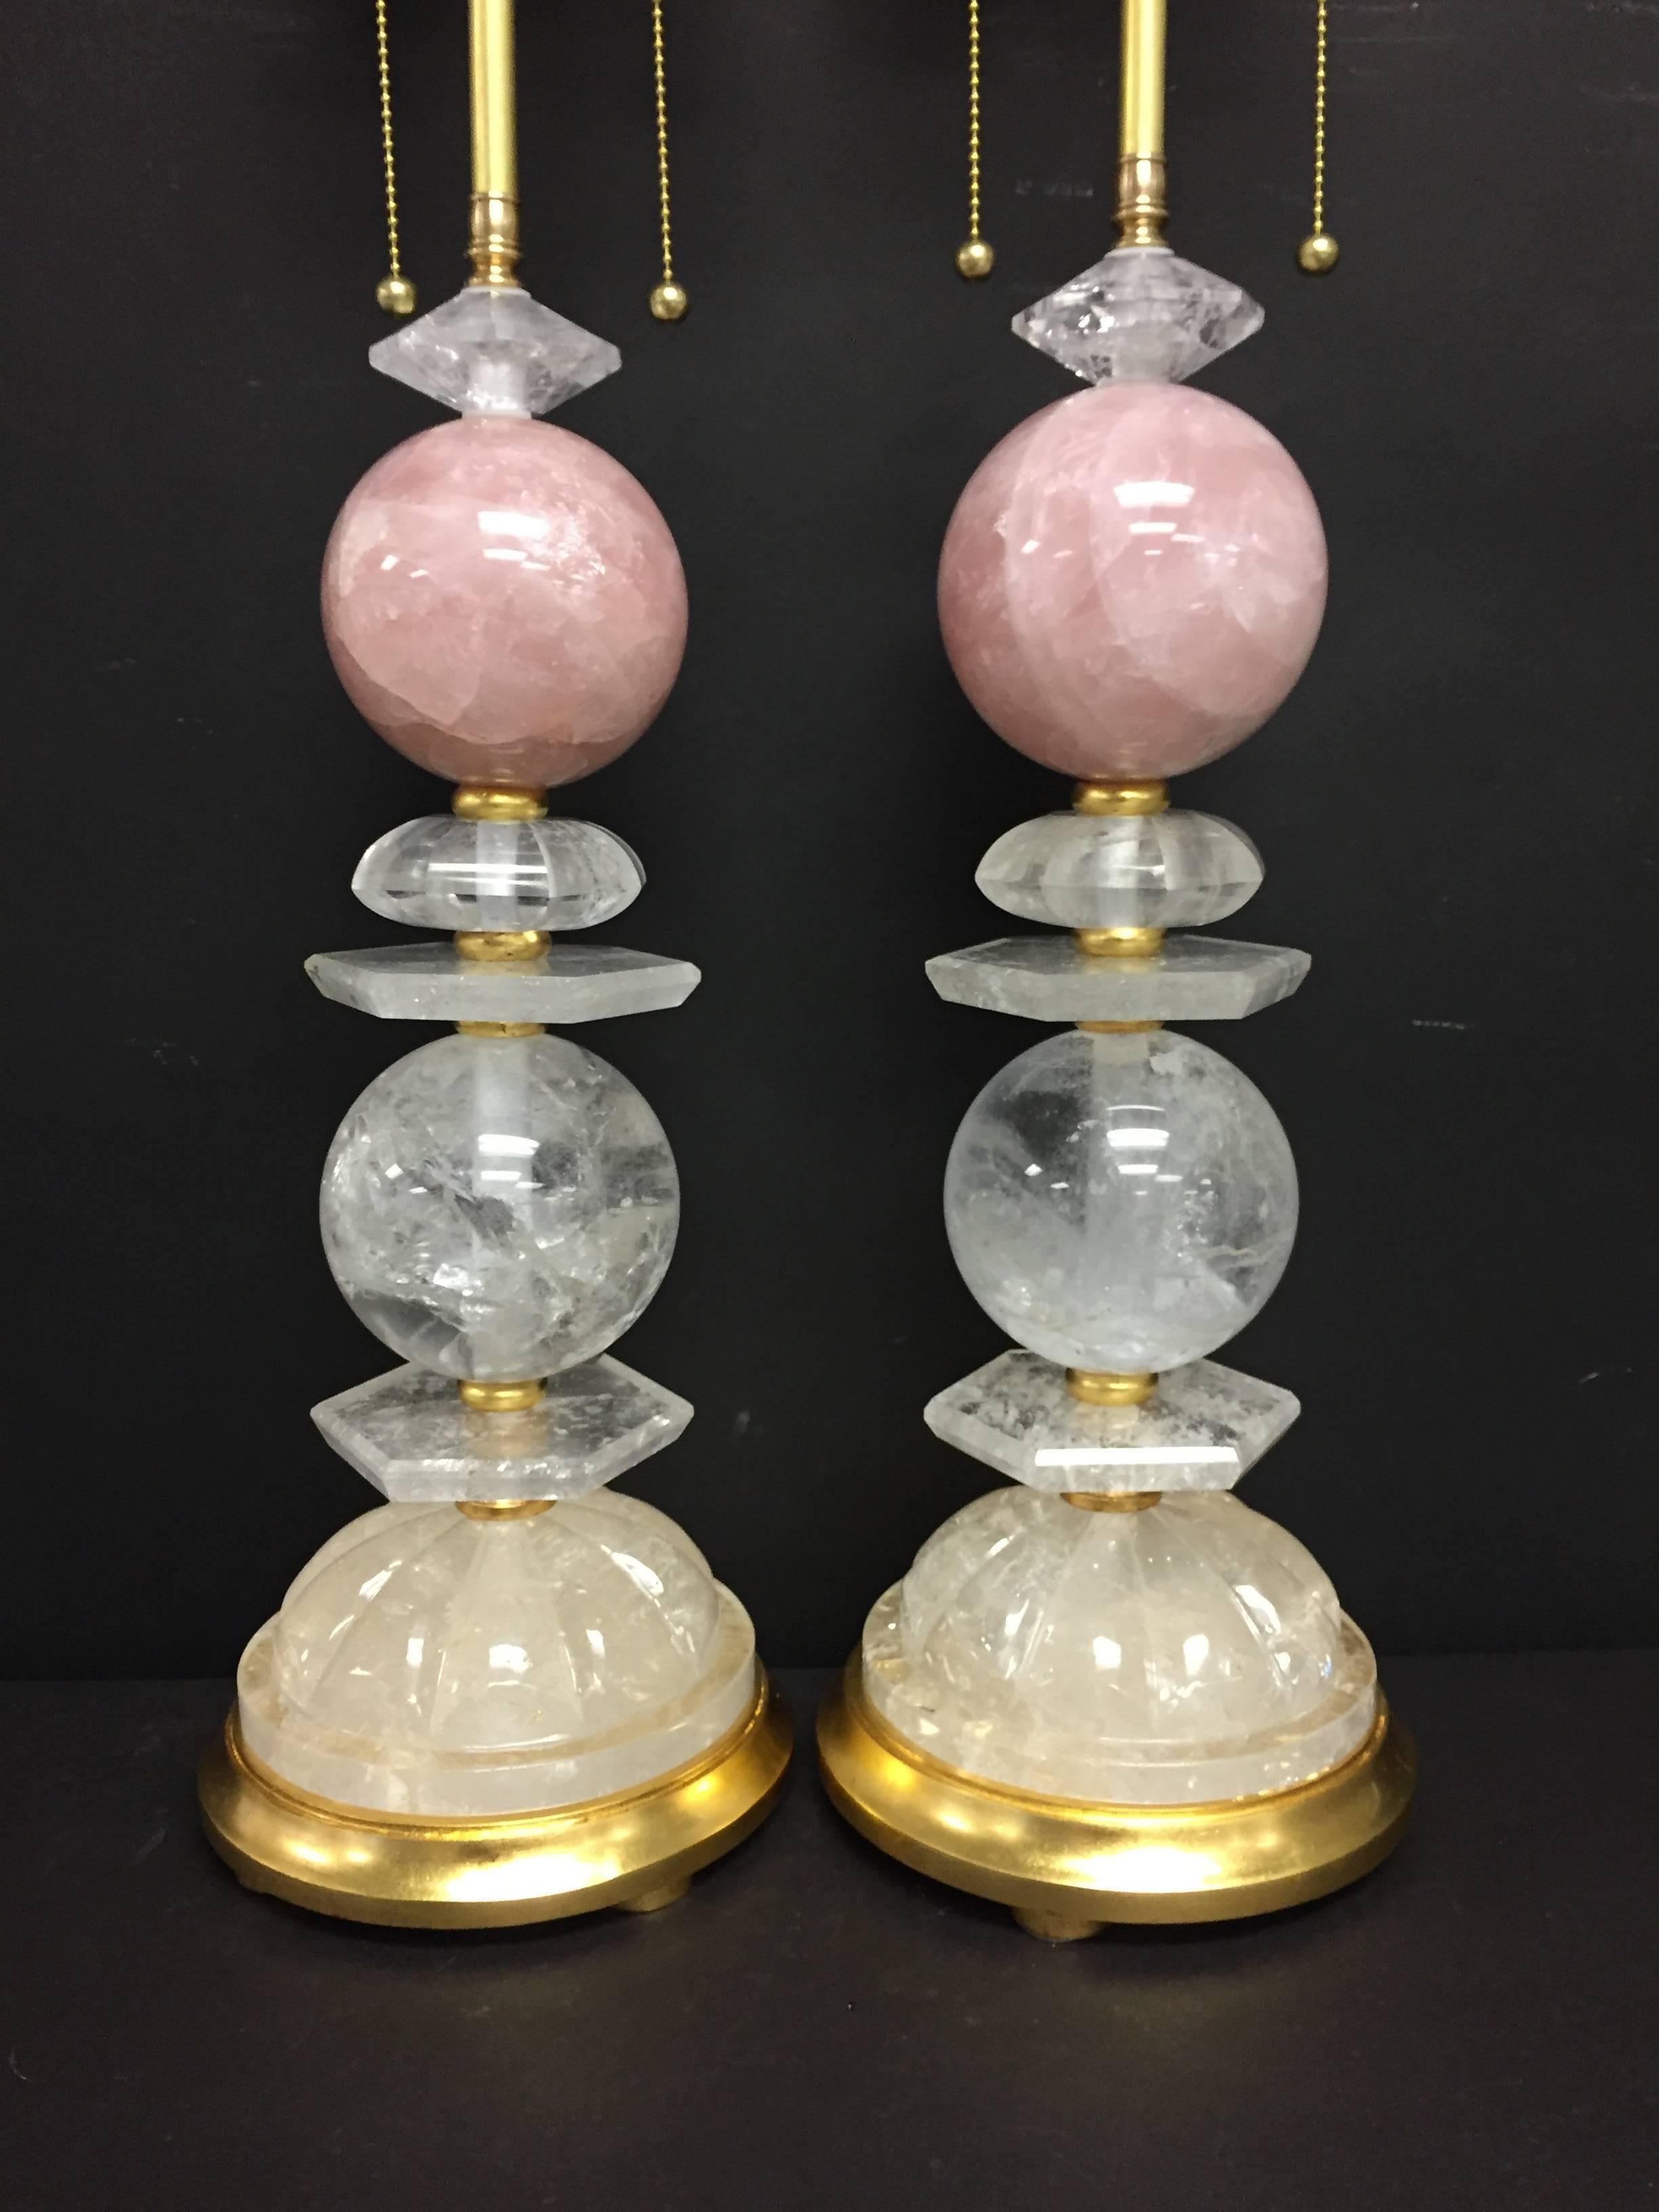 A wonderful pair of Bagues Mid-Century Modern style rock crystal and rose quartz table lamps on gold gilt wood bases, rewired with 75 watts per socket.